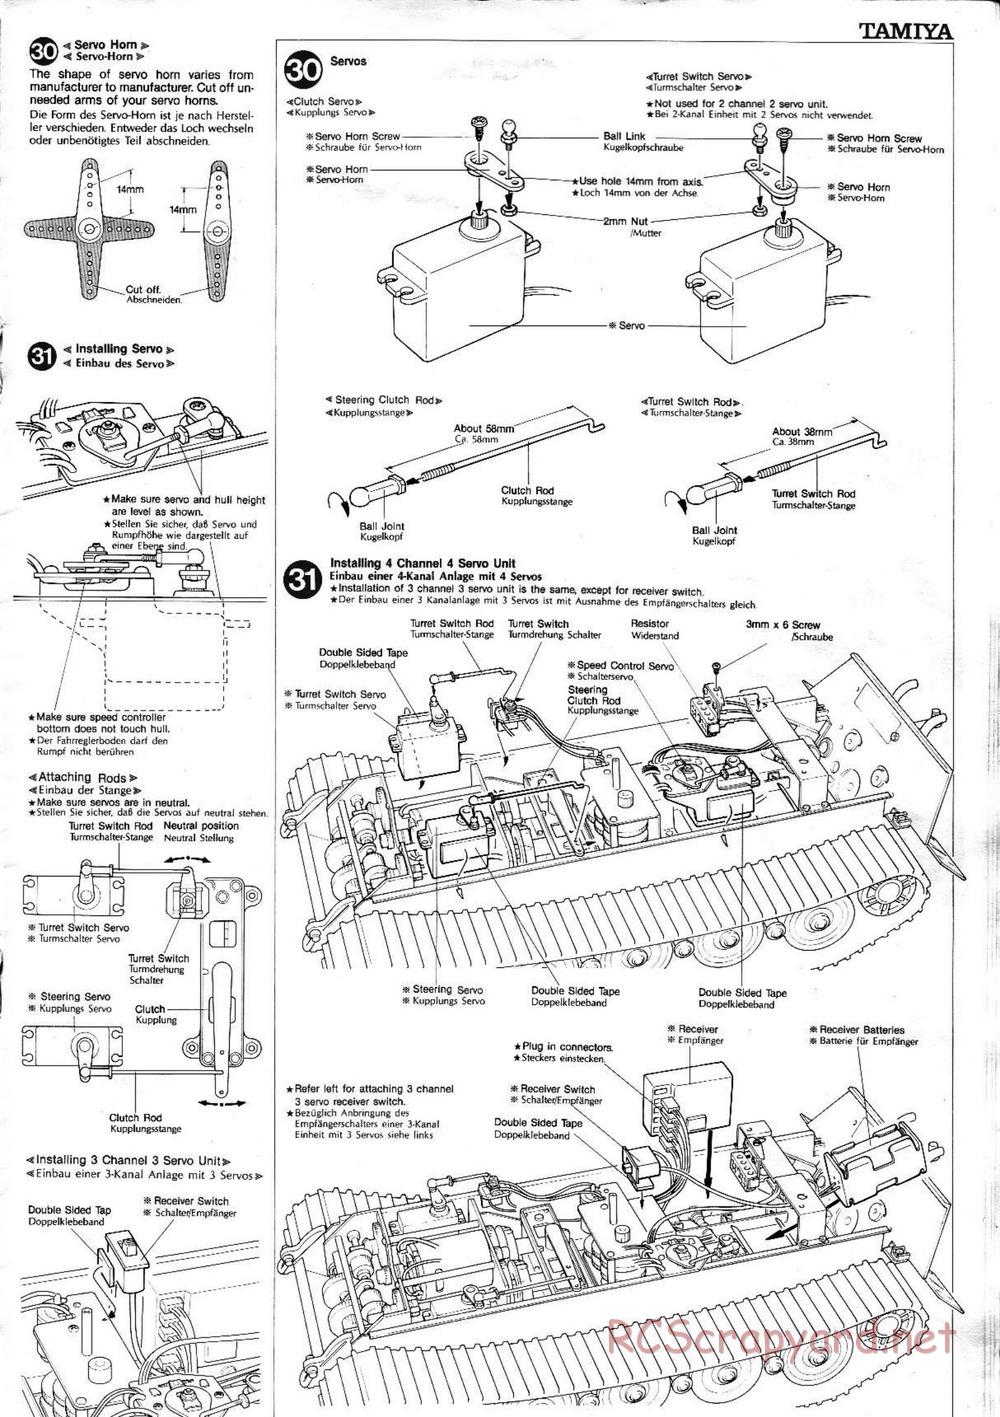 Tamiya - King Tiger (Production Turret) - 1/16 Scale Chassis - Manual - Page 13